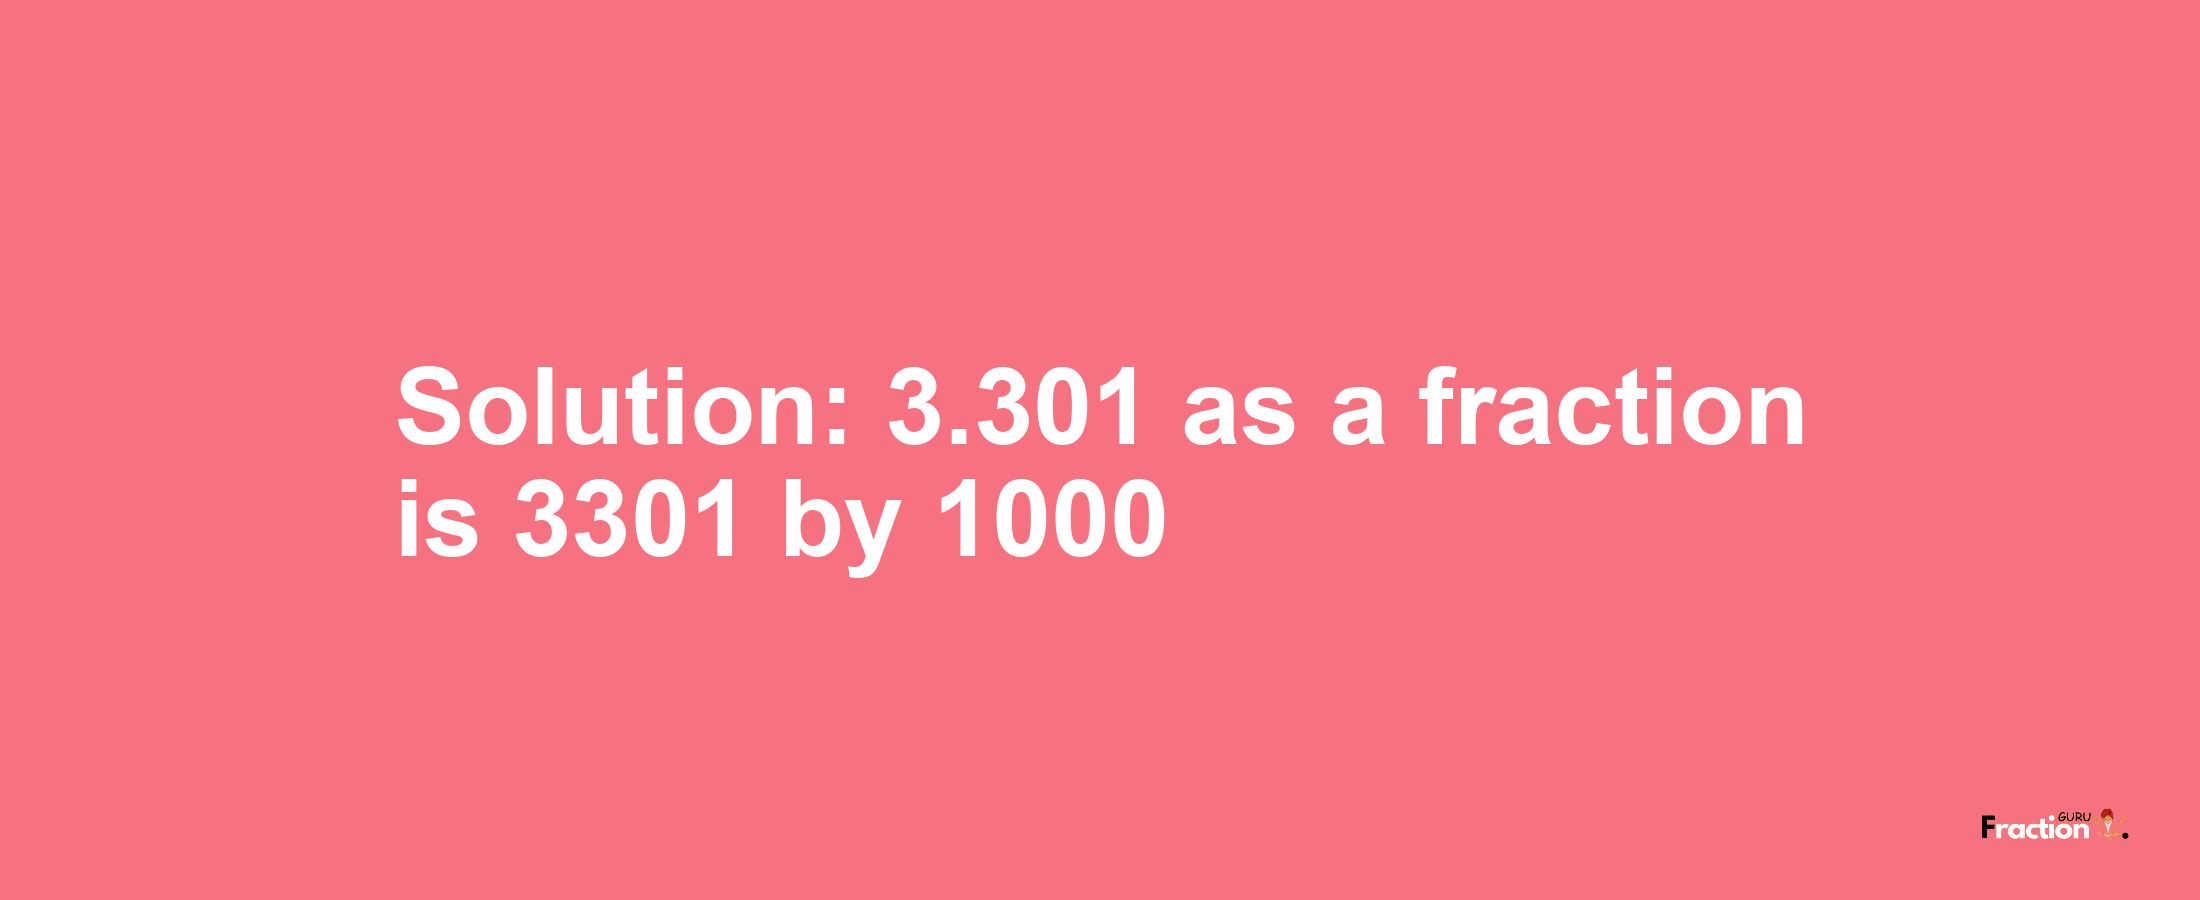 Solution:3.301 as a fraction is 3301/1000